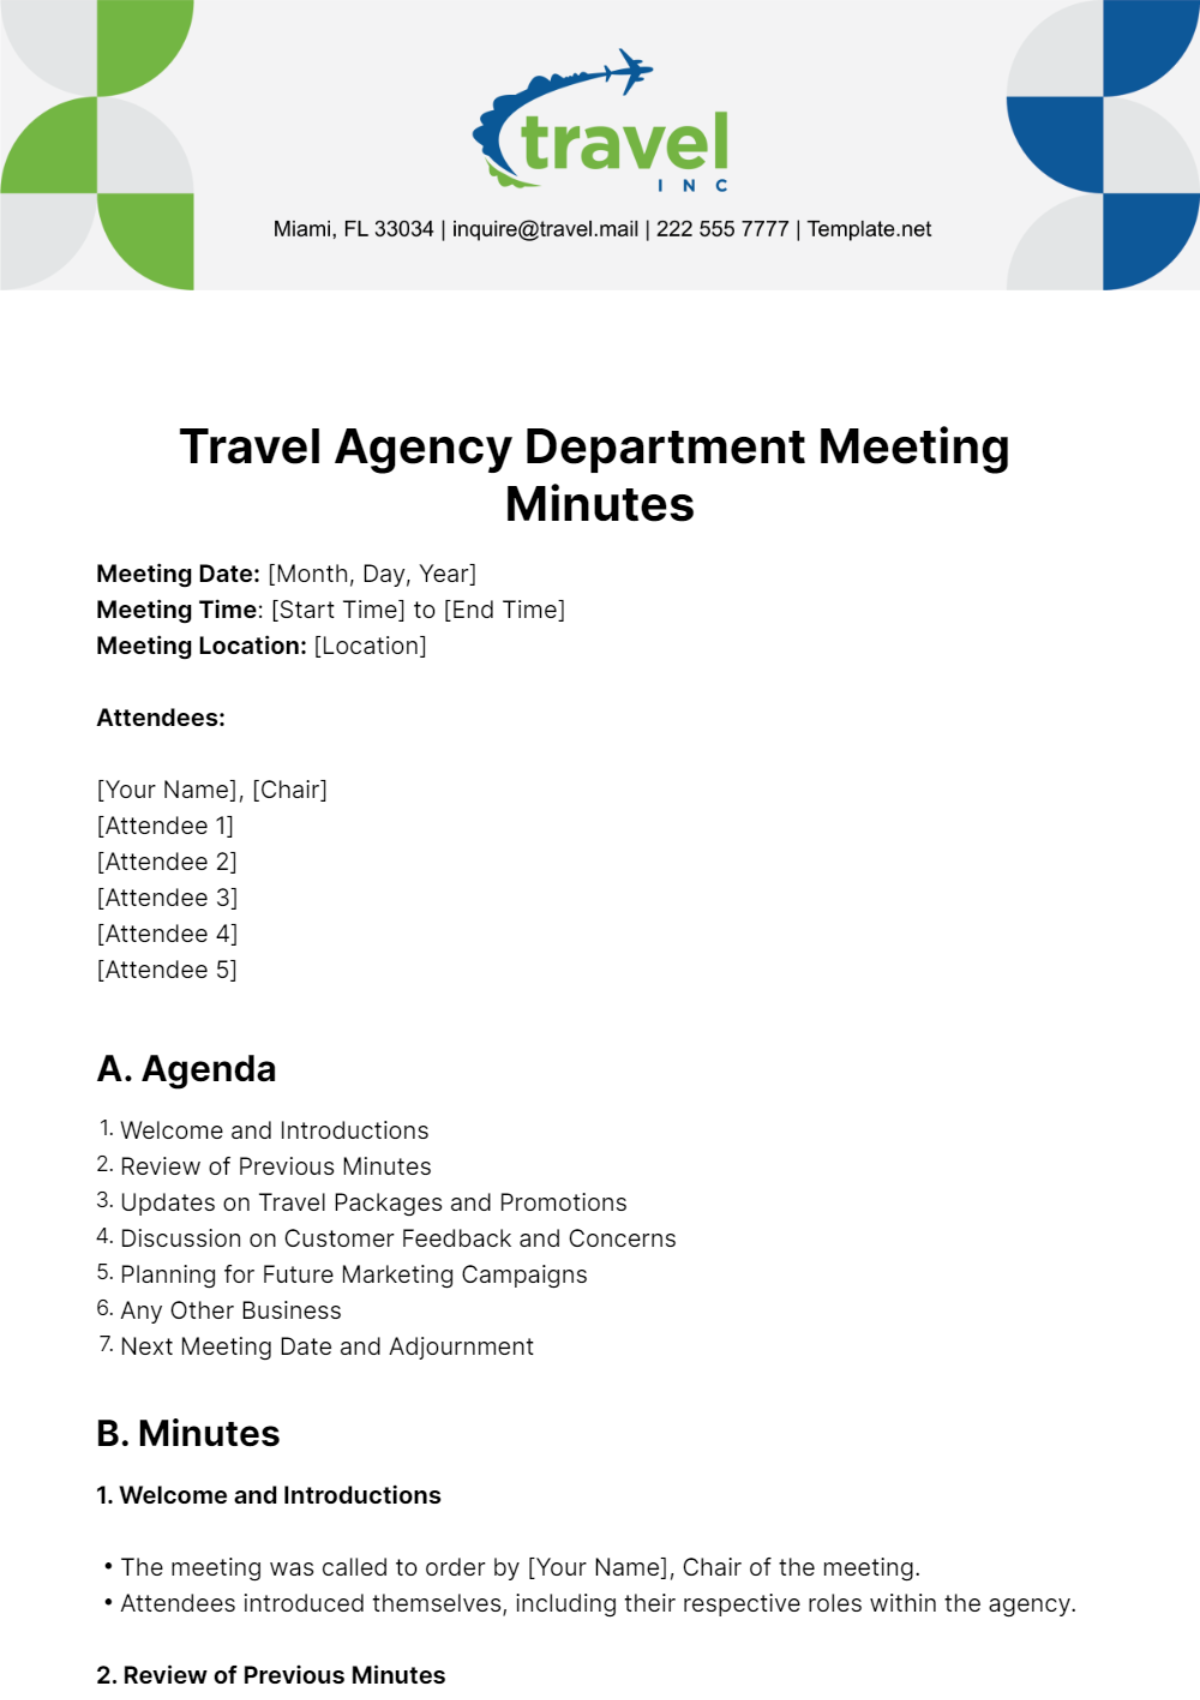 Travel Agency Department Meeting Minutes Template